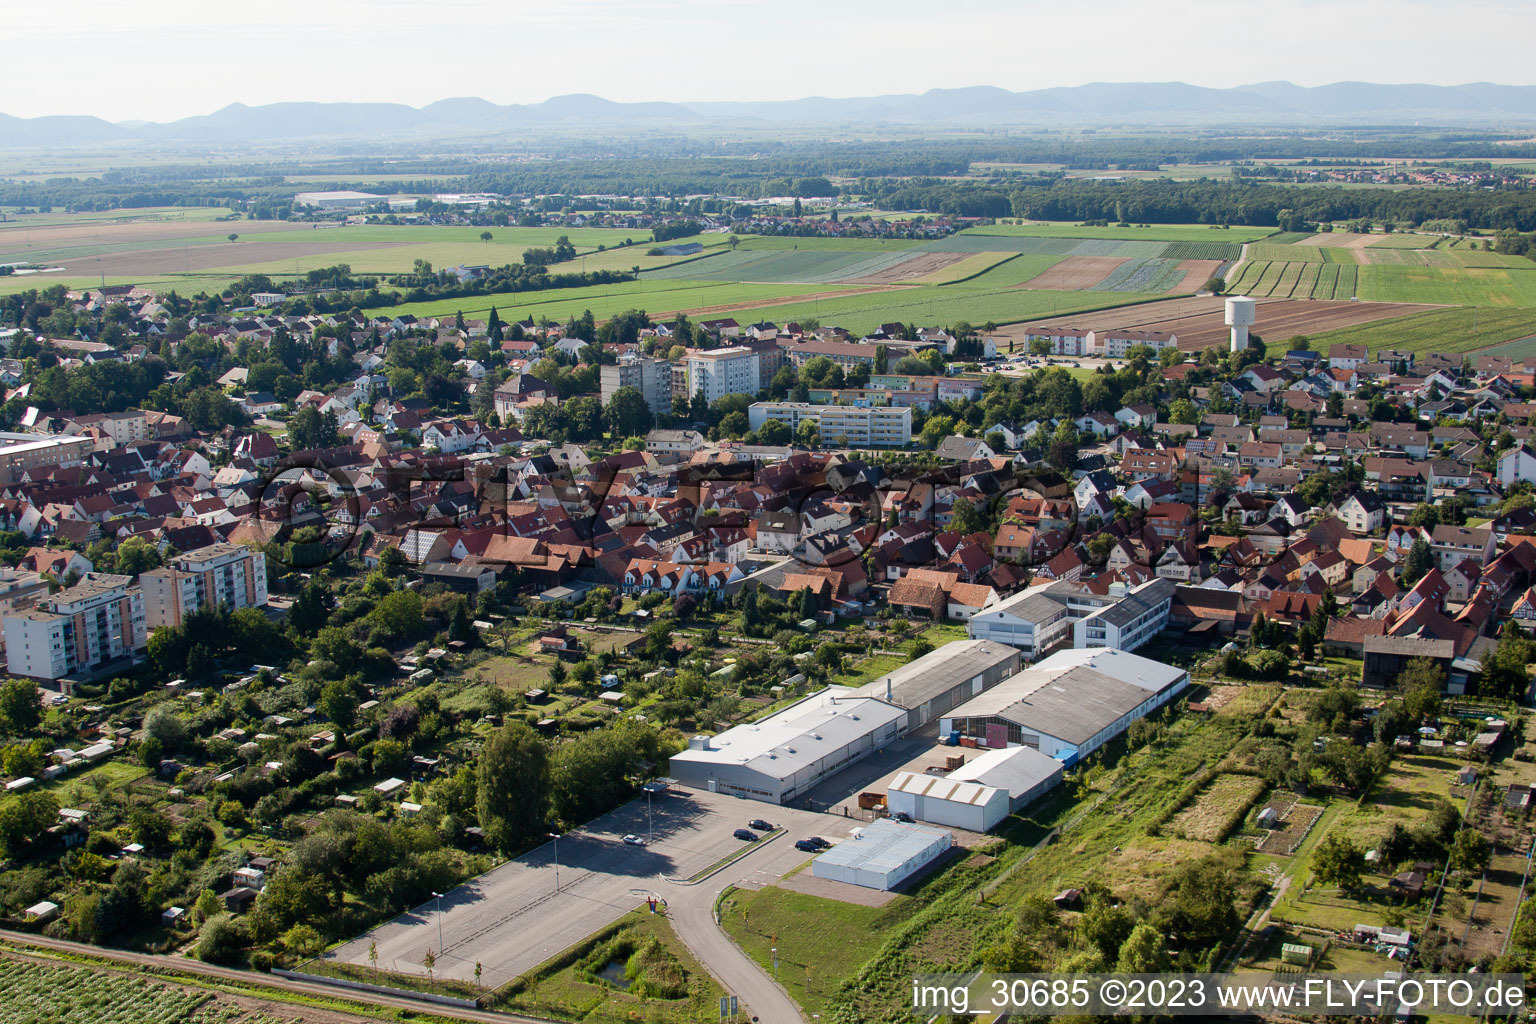 Aerial view of DBK in Kandel in the state Rhineland-Palatinate, Germany